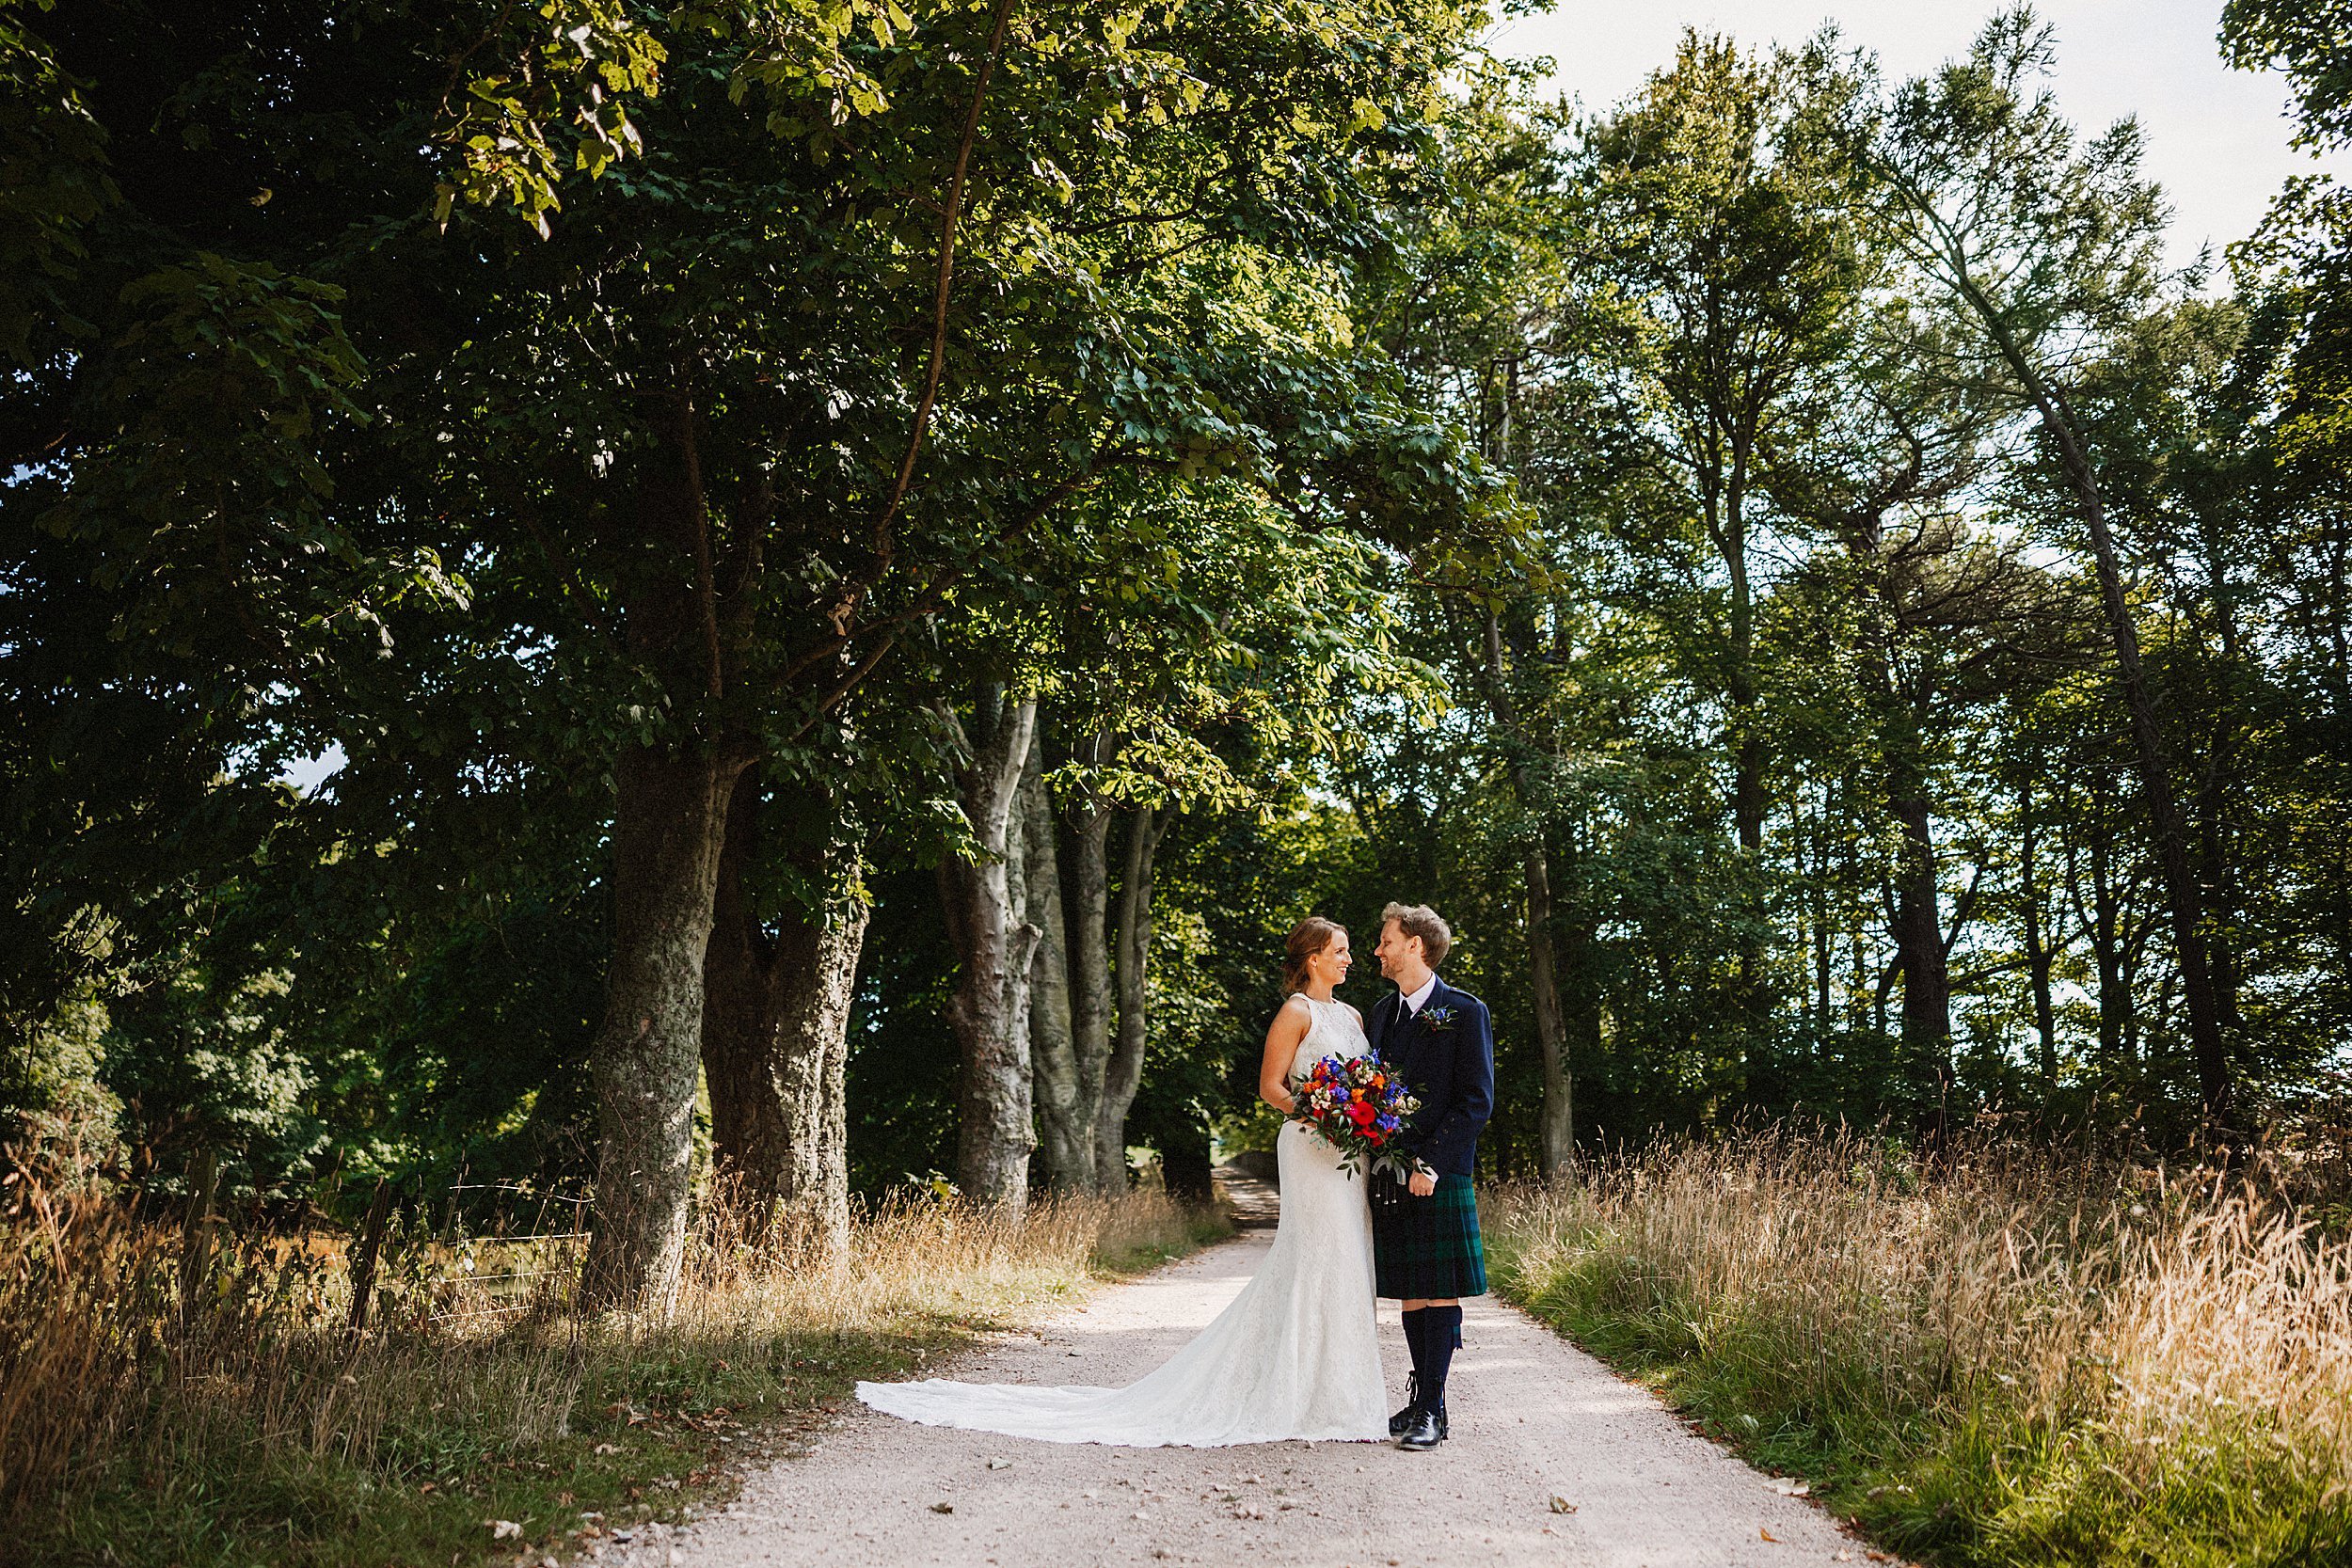 Bride and groom walk through the grounds of a sunny Kinkell Byre on their wedding day in St Andrews